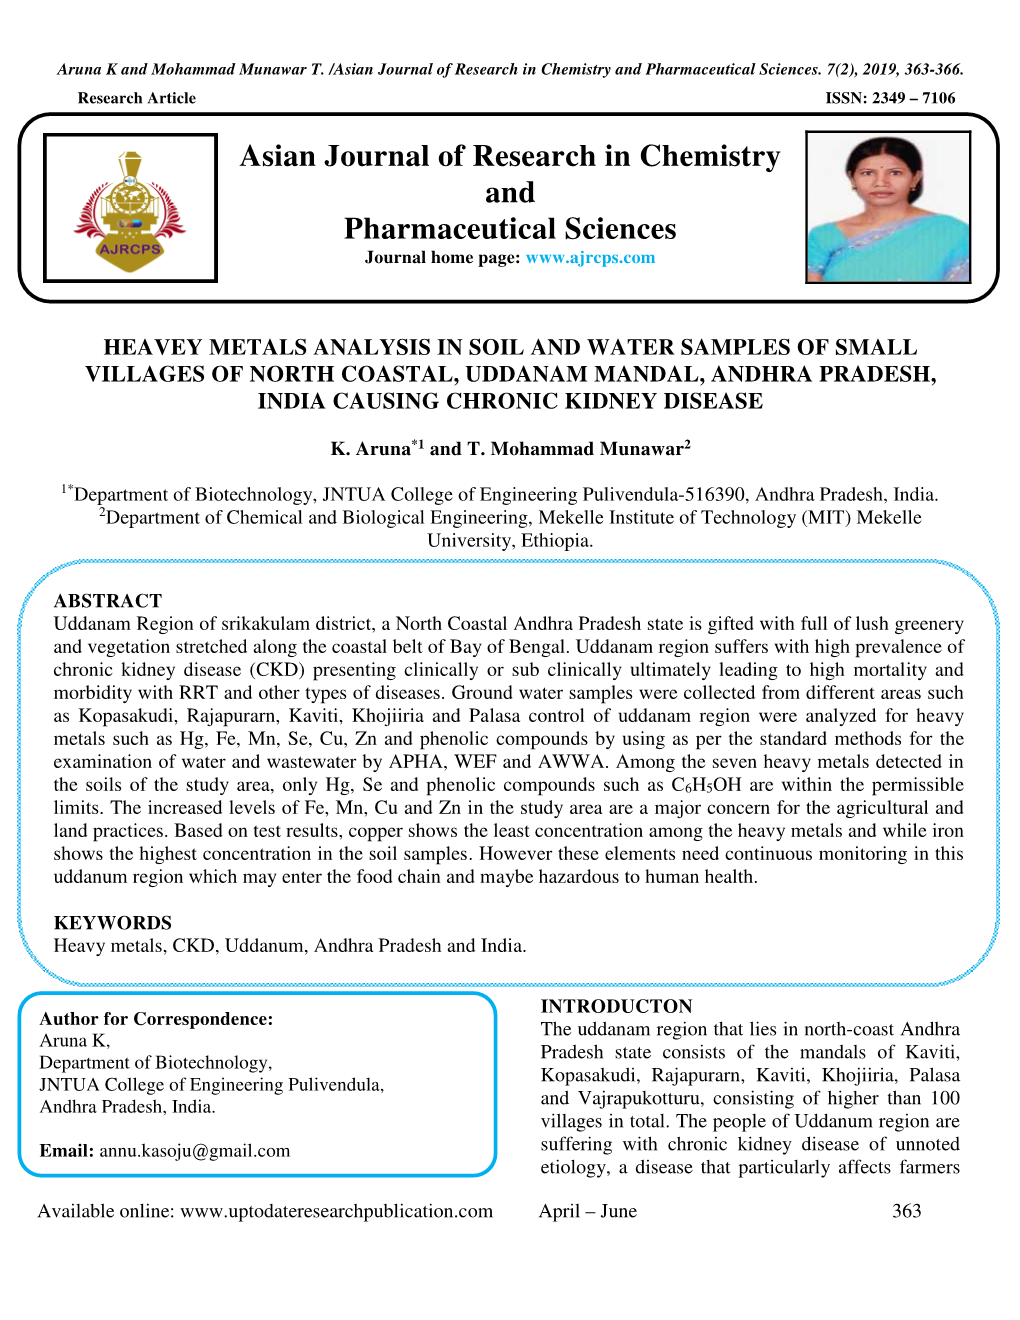 Heavey Metals Analysis in Soil and Water Samples of Small Villages of North Coastal, Uddanam Mandal, Andhra Pradesh, India Causing Chronic Kidney Disease